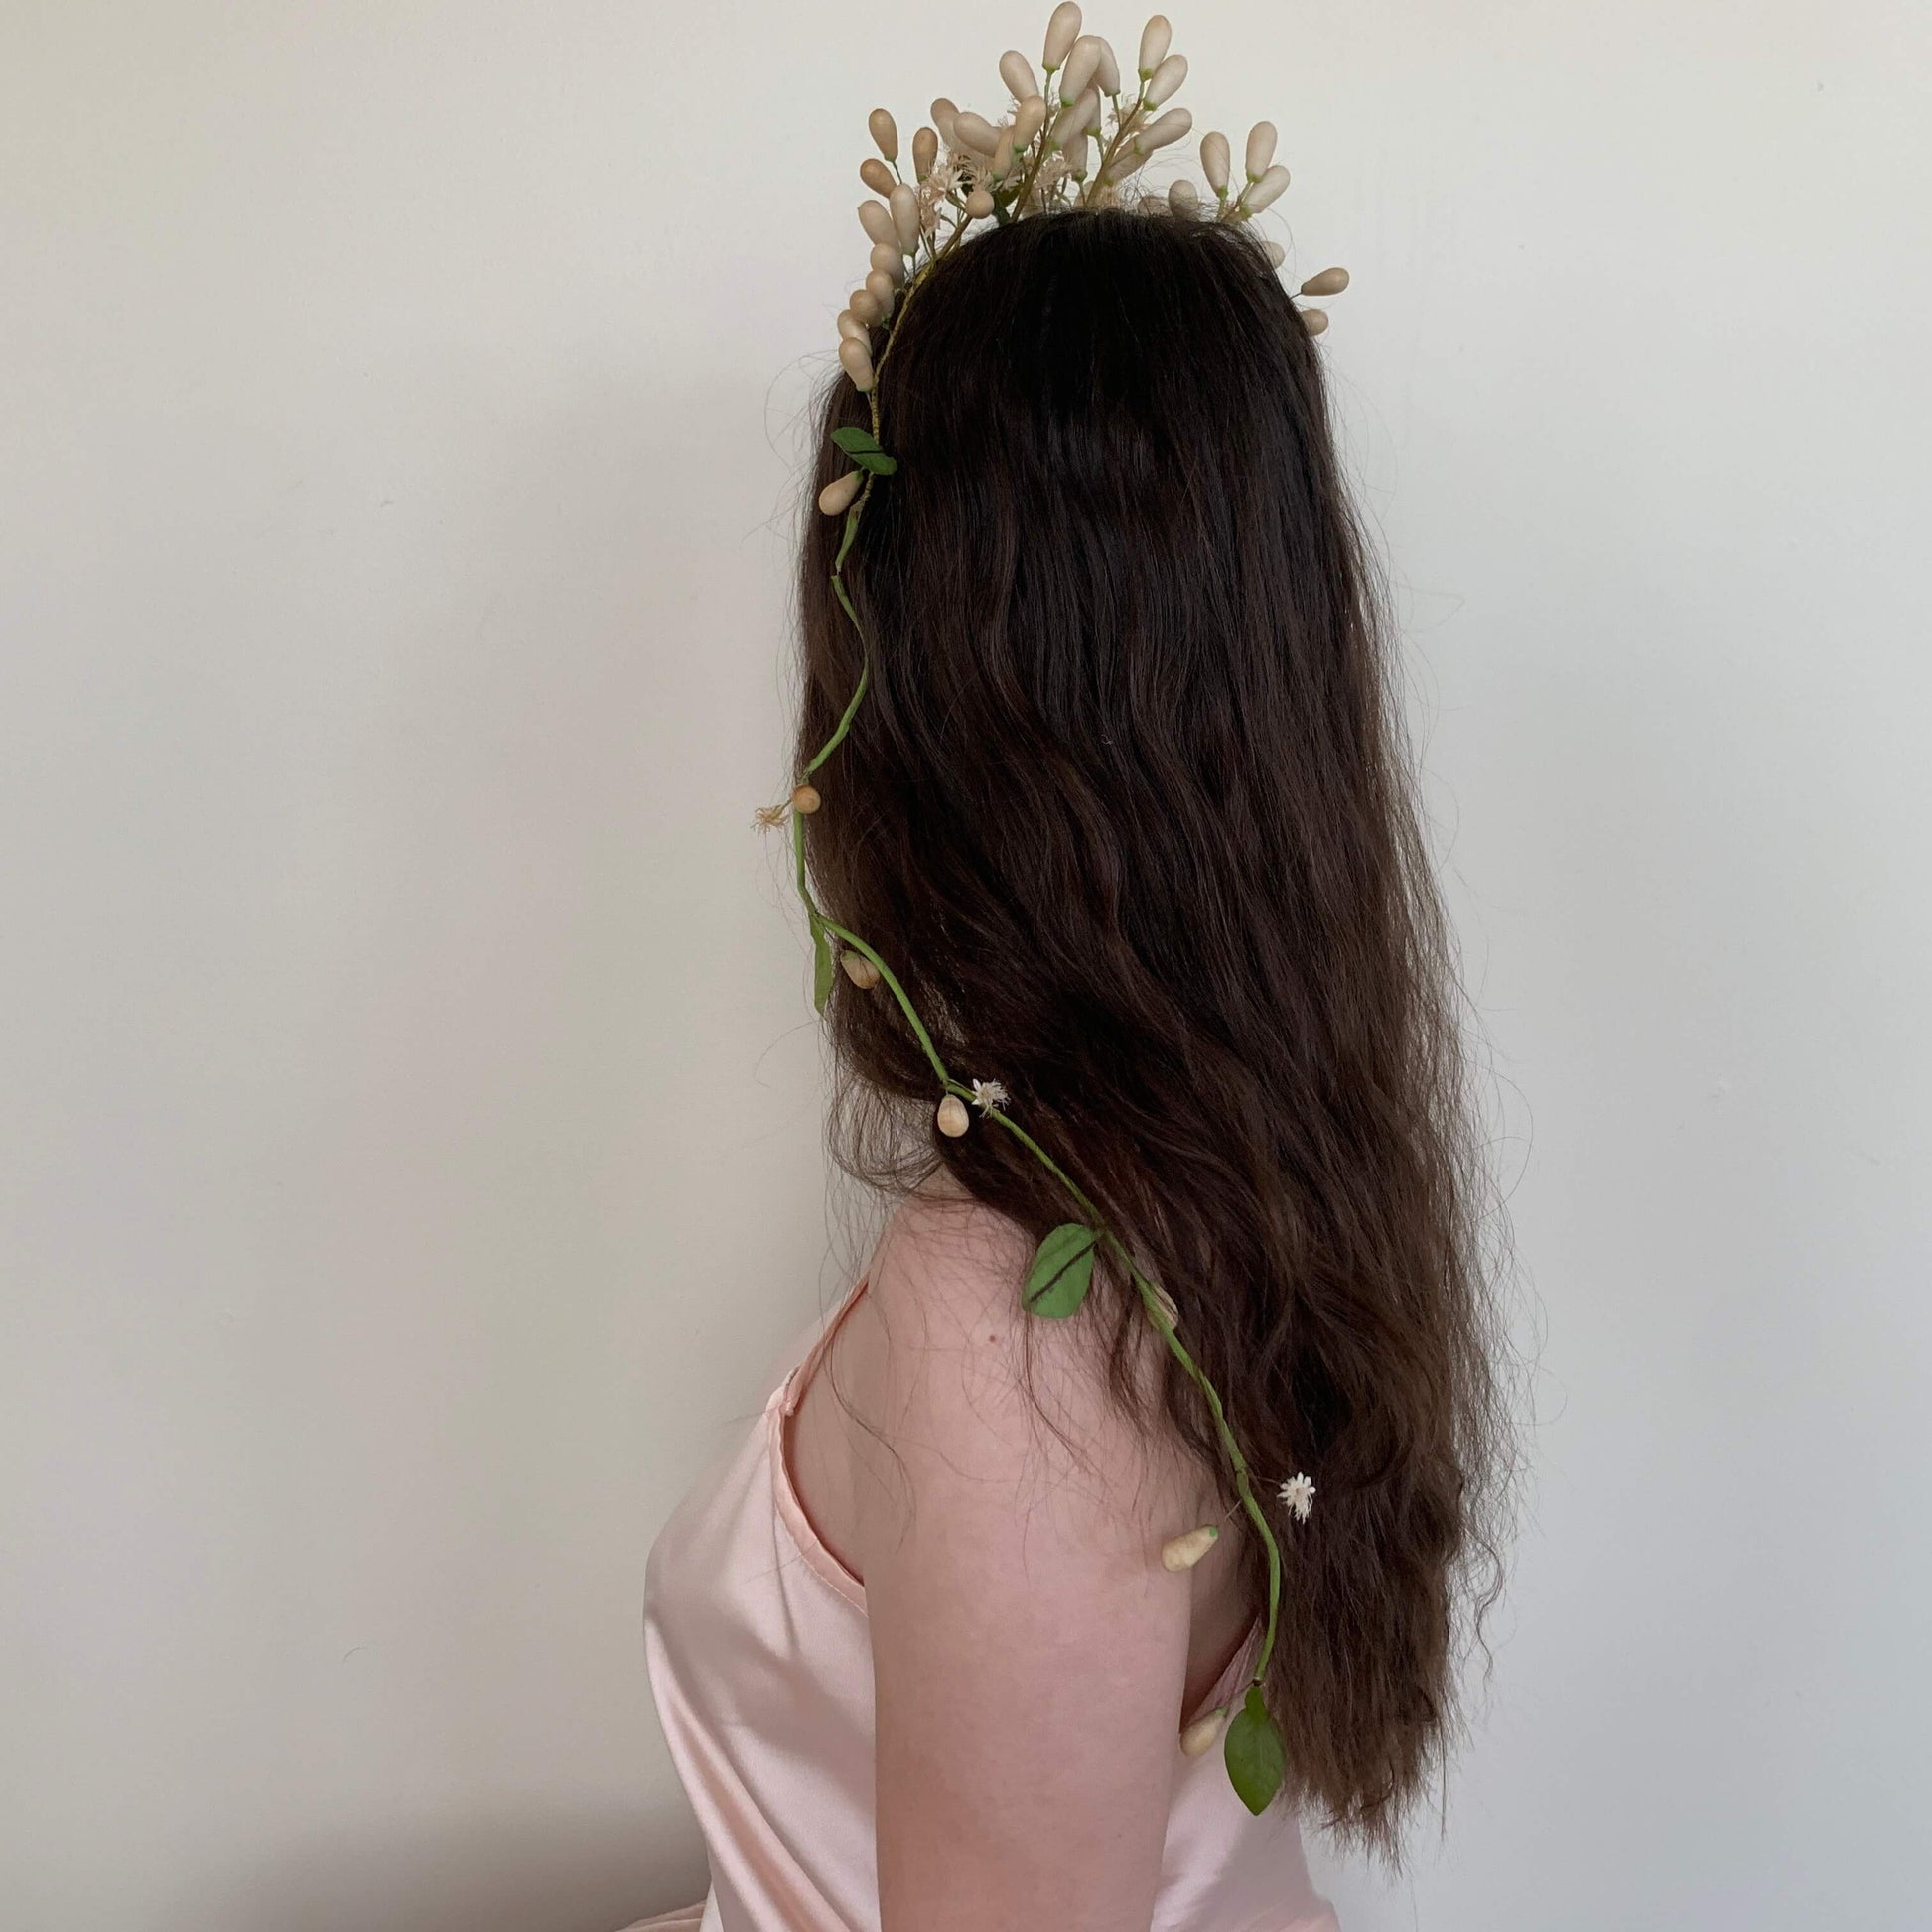 Victorian wax flower crown view from the back